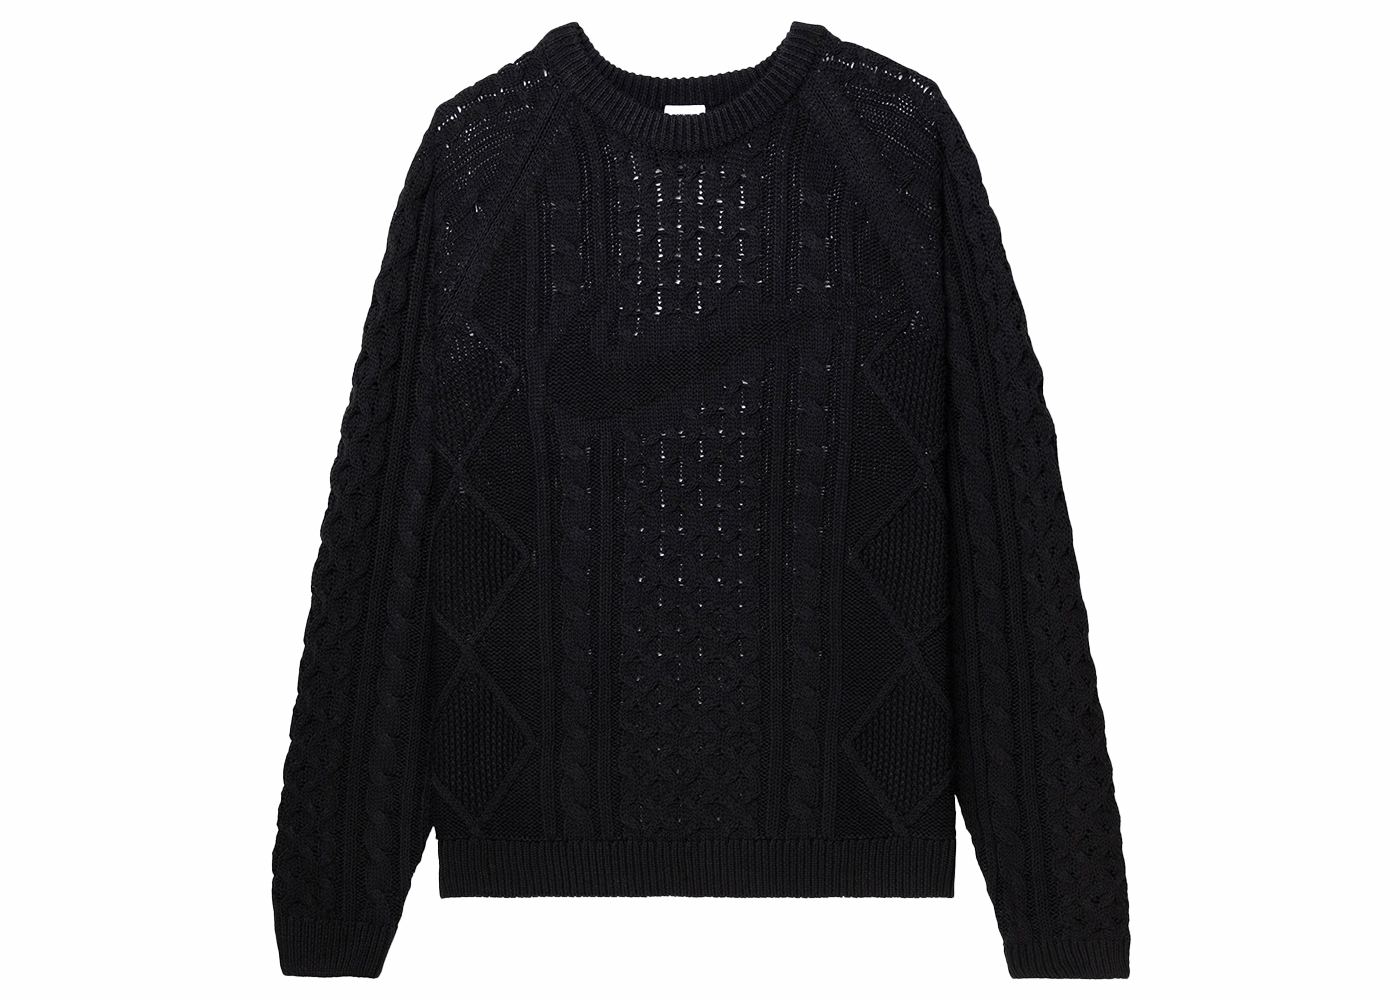 Nike Cable Knit L/S Sweater (Asia Sizing) Black Men's - FW23 - US